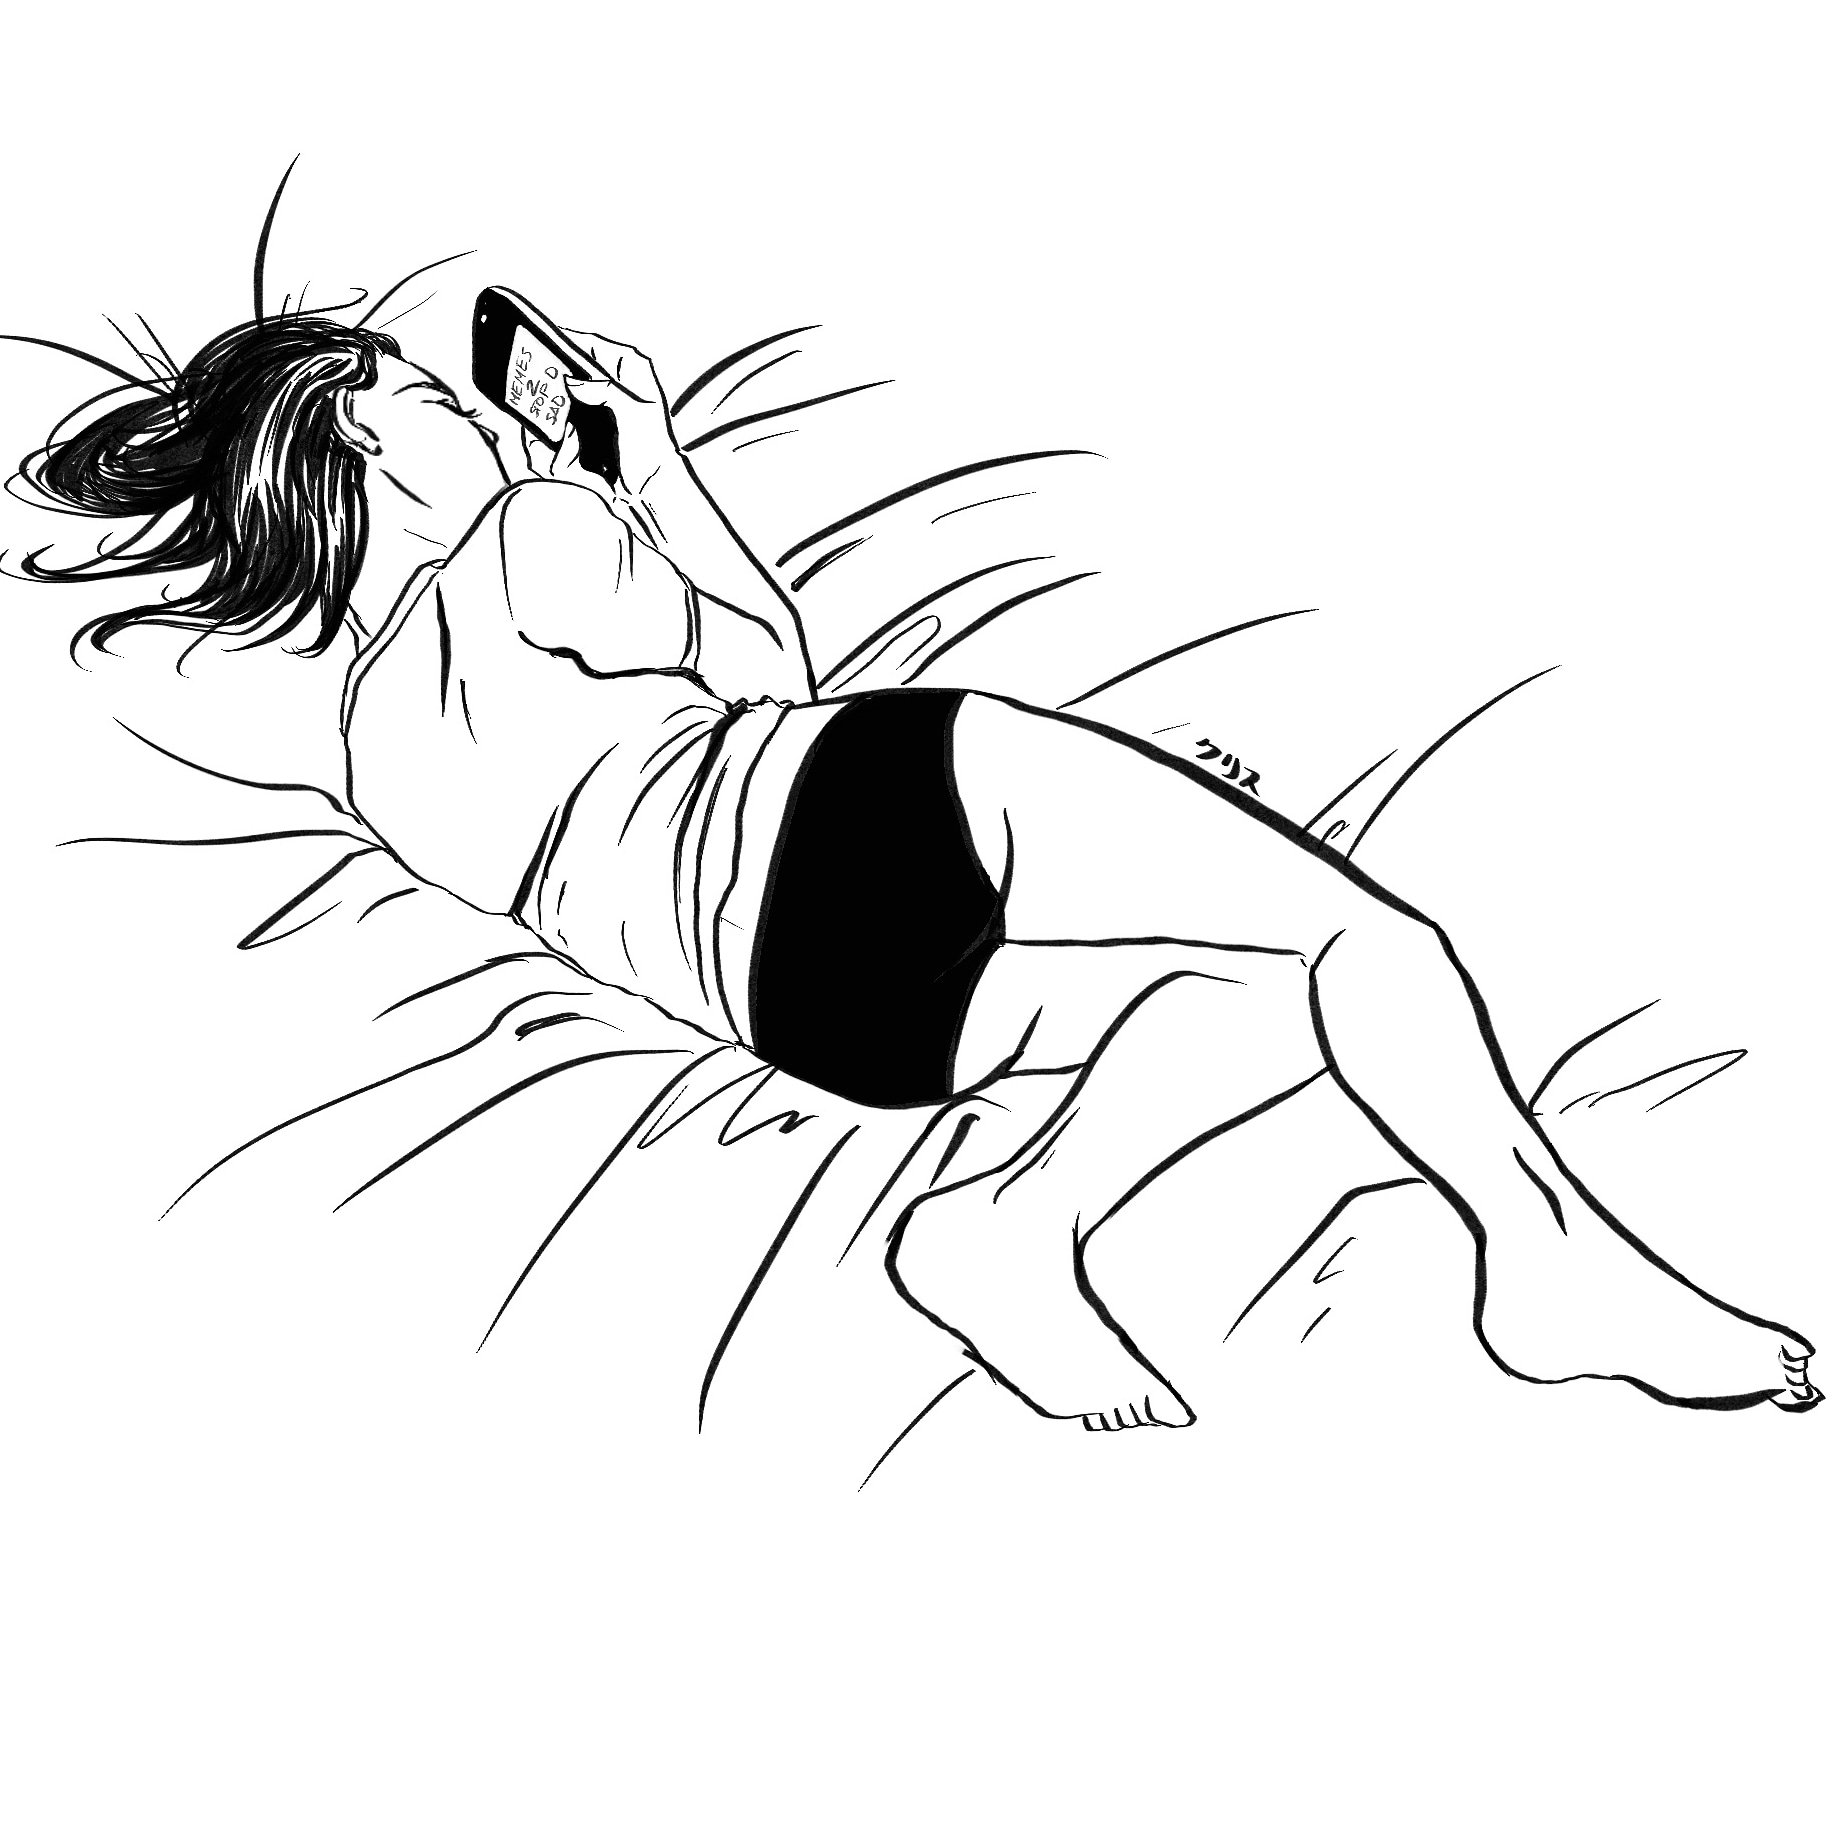 Doodle Art Illustration Of A Nude Female Human Figure In Supine Pose Or Lying  Down Done In Continuous Line Drawing Style In Black And White On Isolated  Background Royalty Free SVG Cliparts